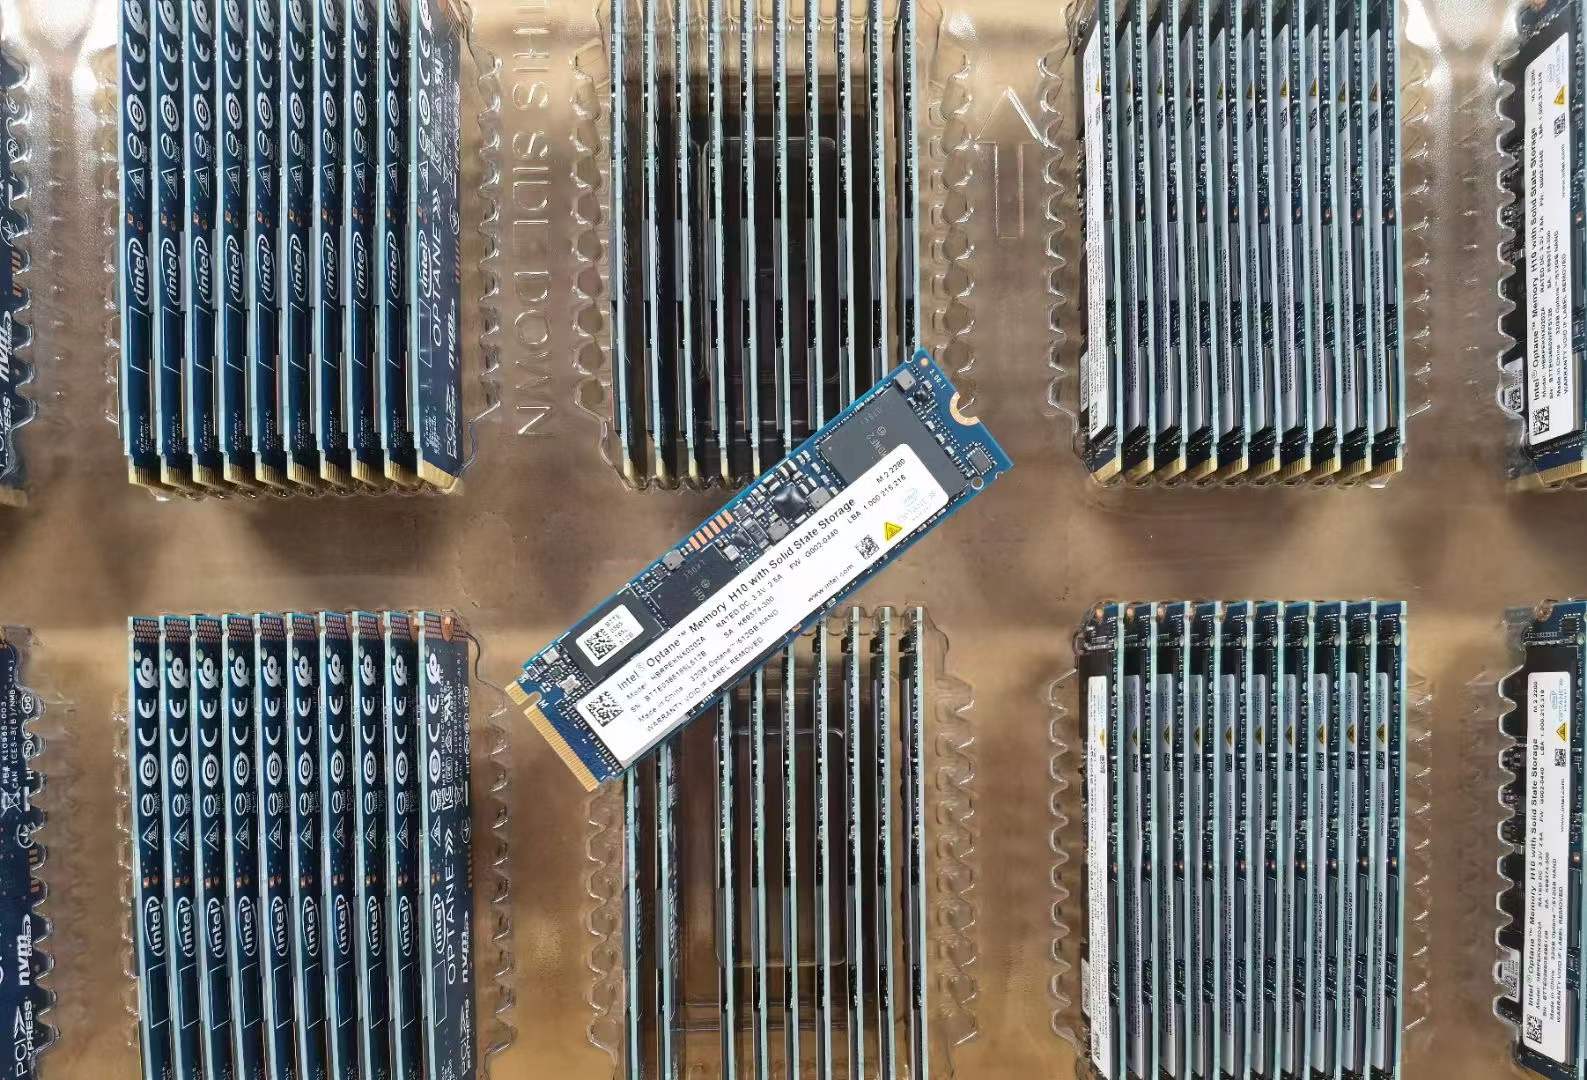 intel optane memory H10 with solid state storage 512GB